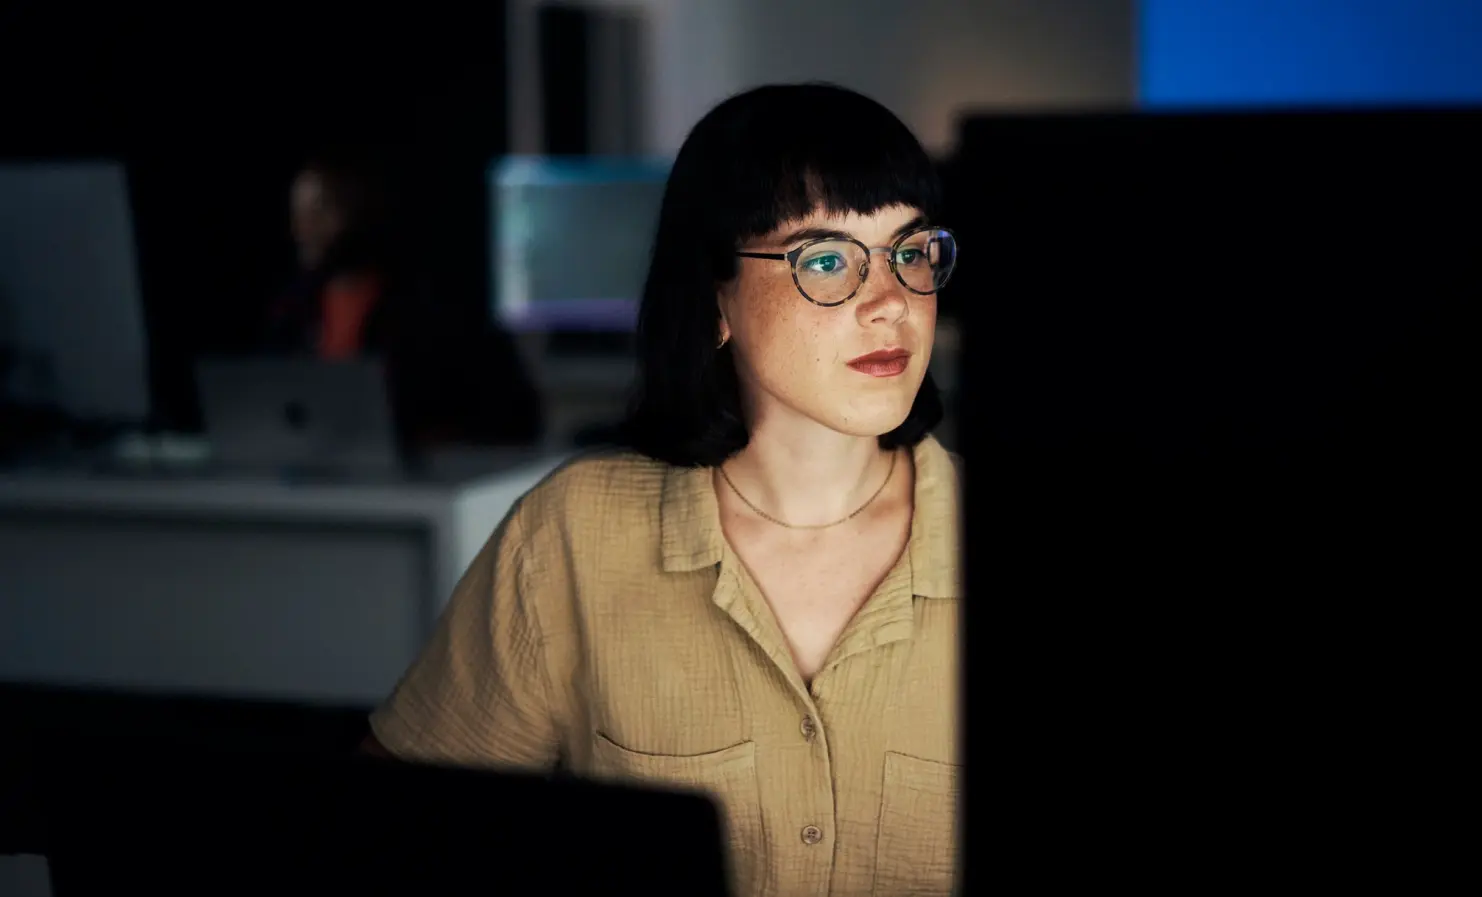 An image of a woman looking at a computer screen.